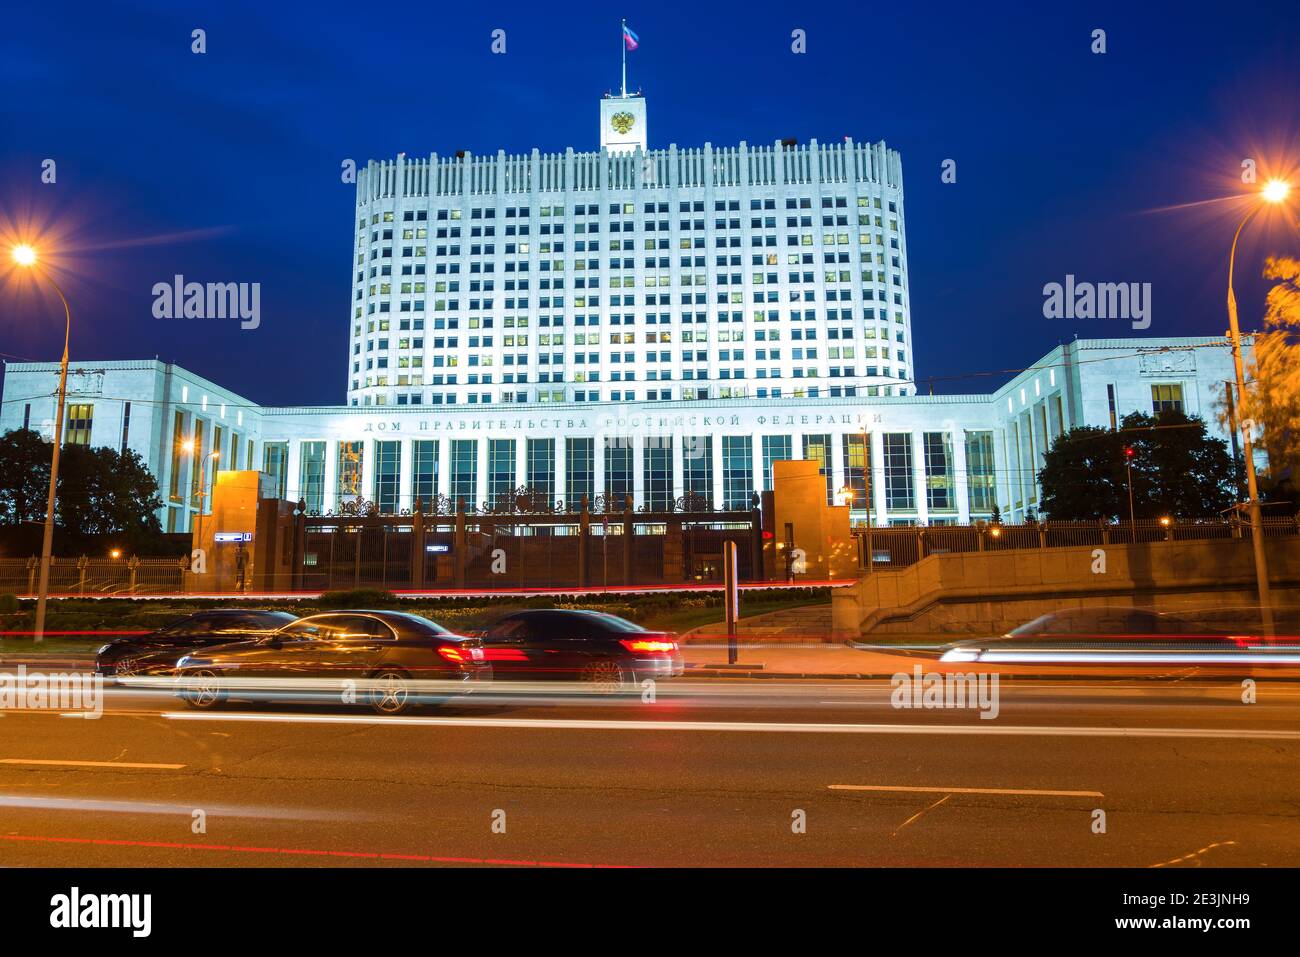 MOSCOW, RUSSIA - SEPTEMBER 07, 2016: View of the Government House of the Russian Federation (White House) at September night Stock Photo